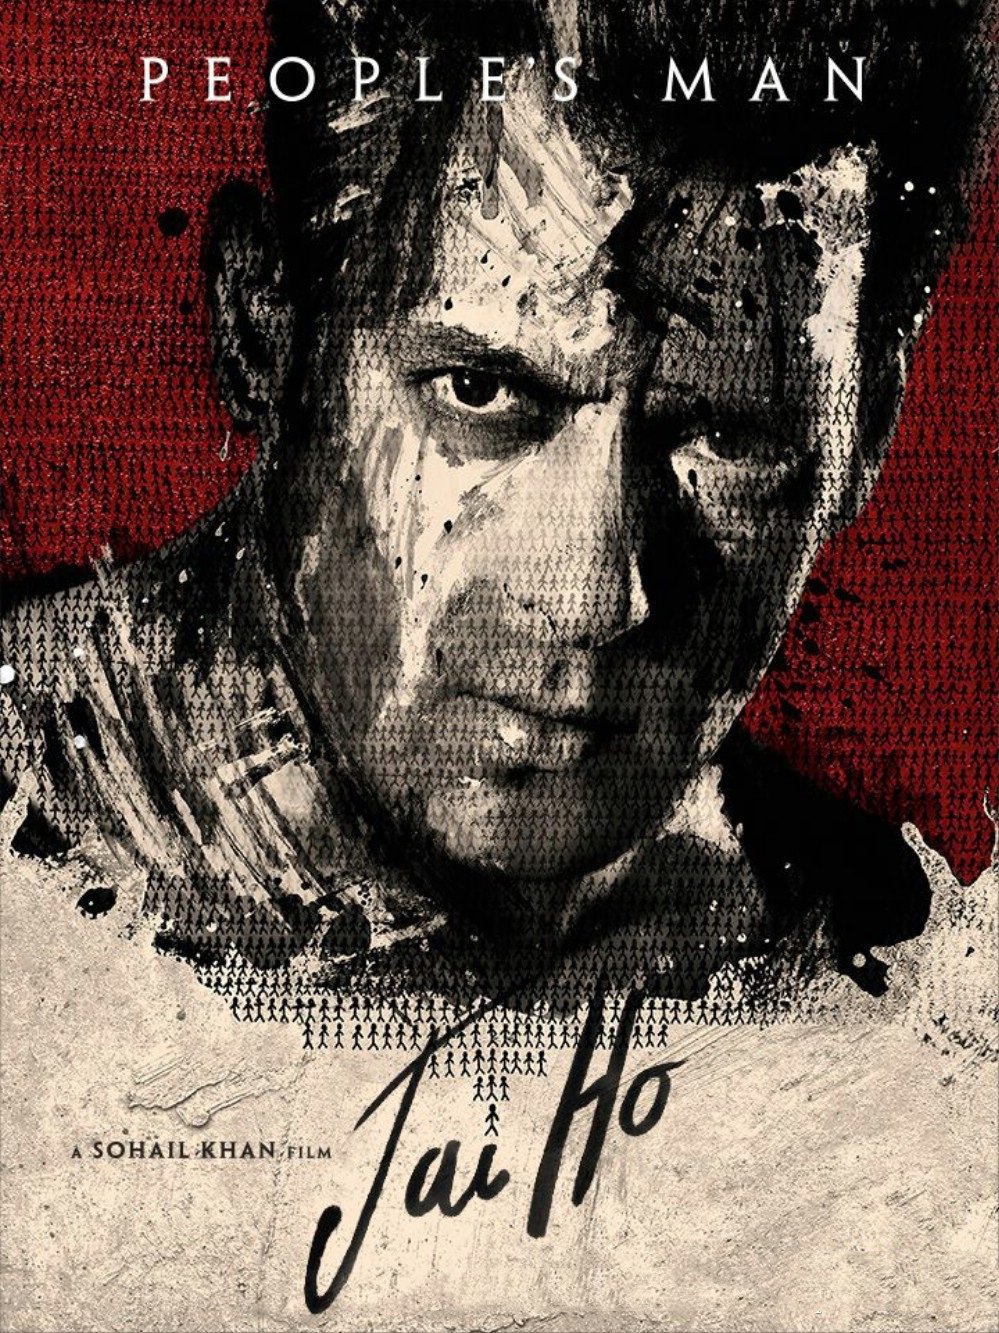 Poster for the movie "Jai Ho"